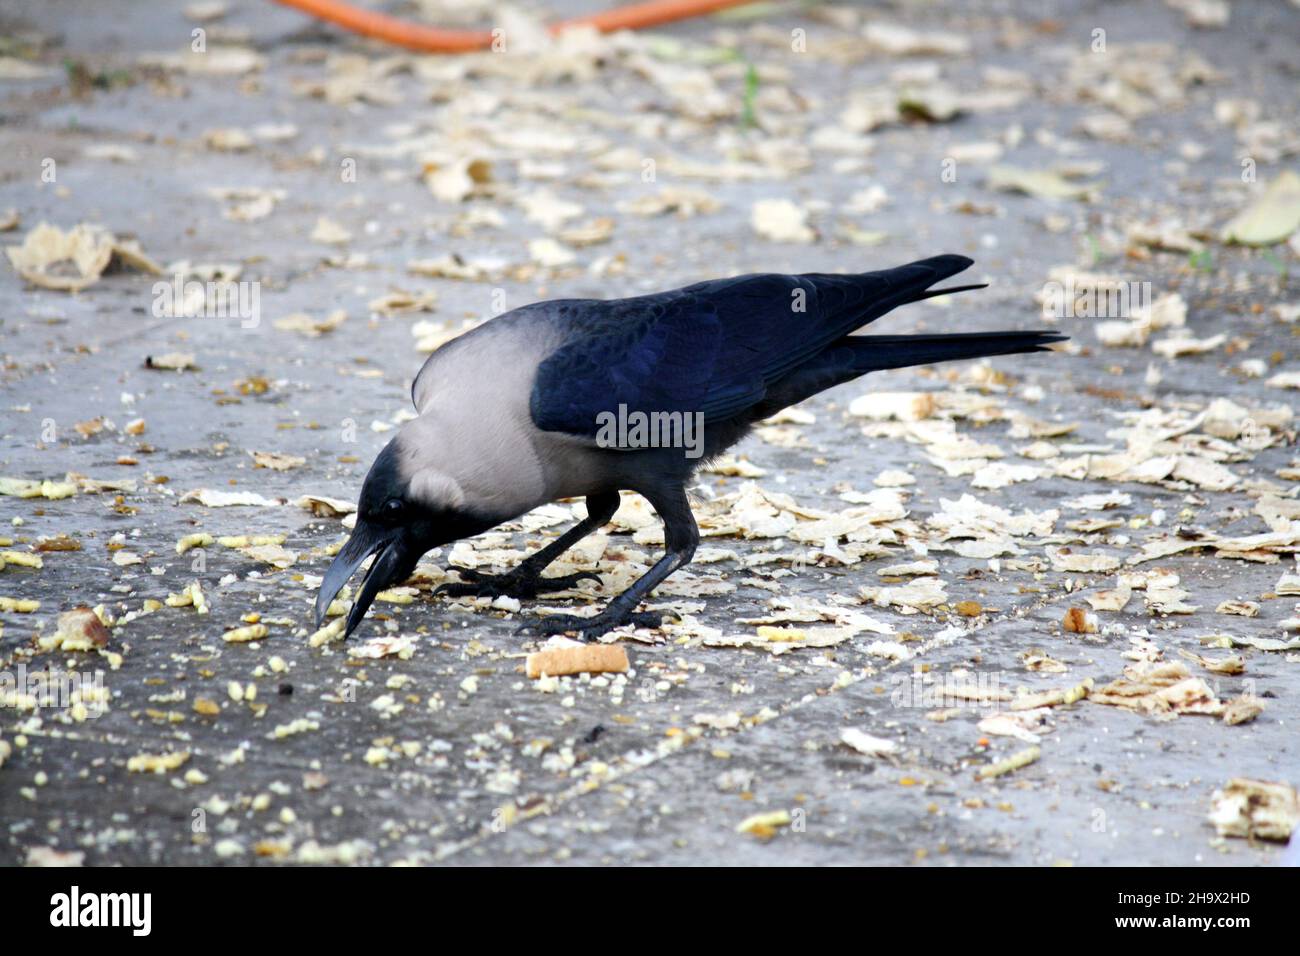 Indian house crow (Corvus splendens) in search of food : (pix SShukla) Stock Photo